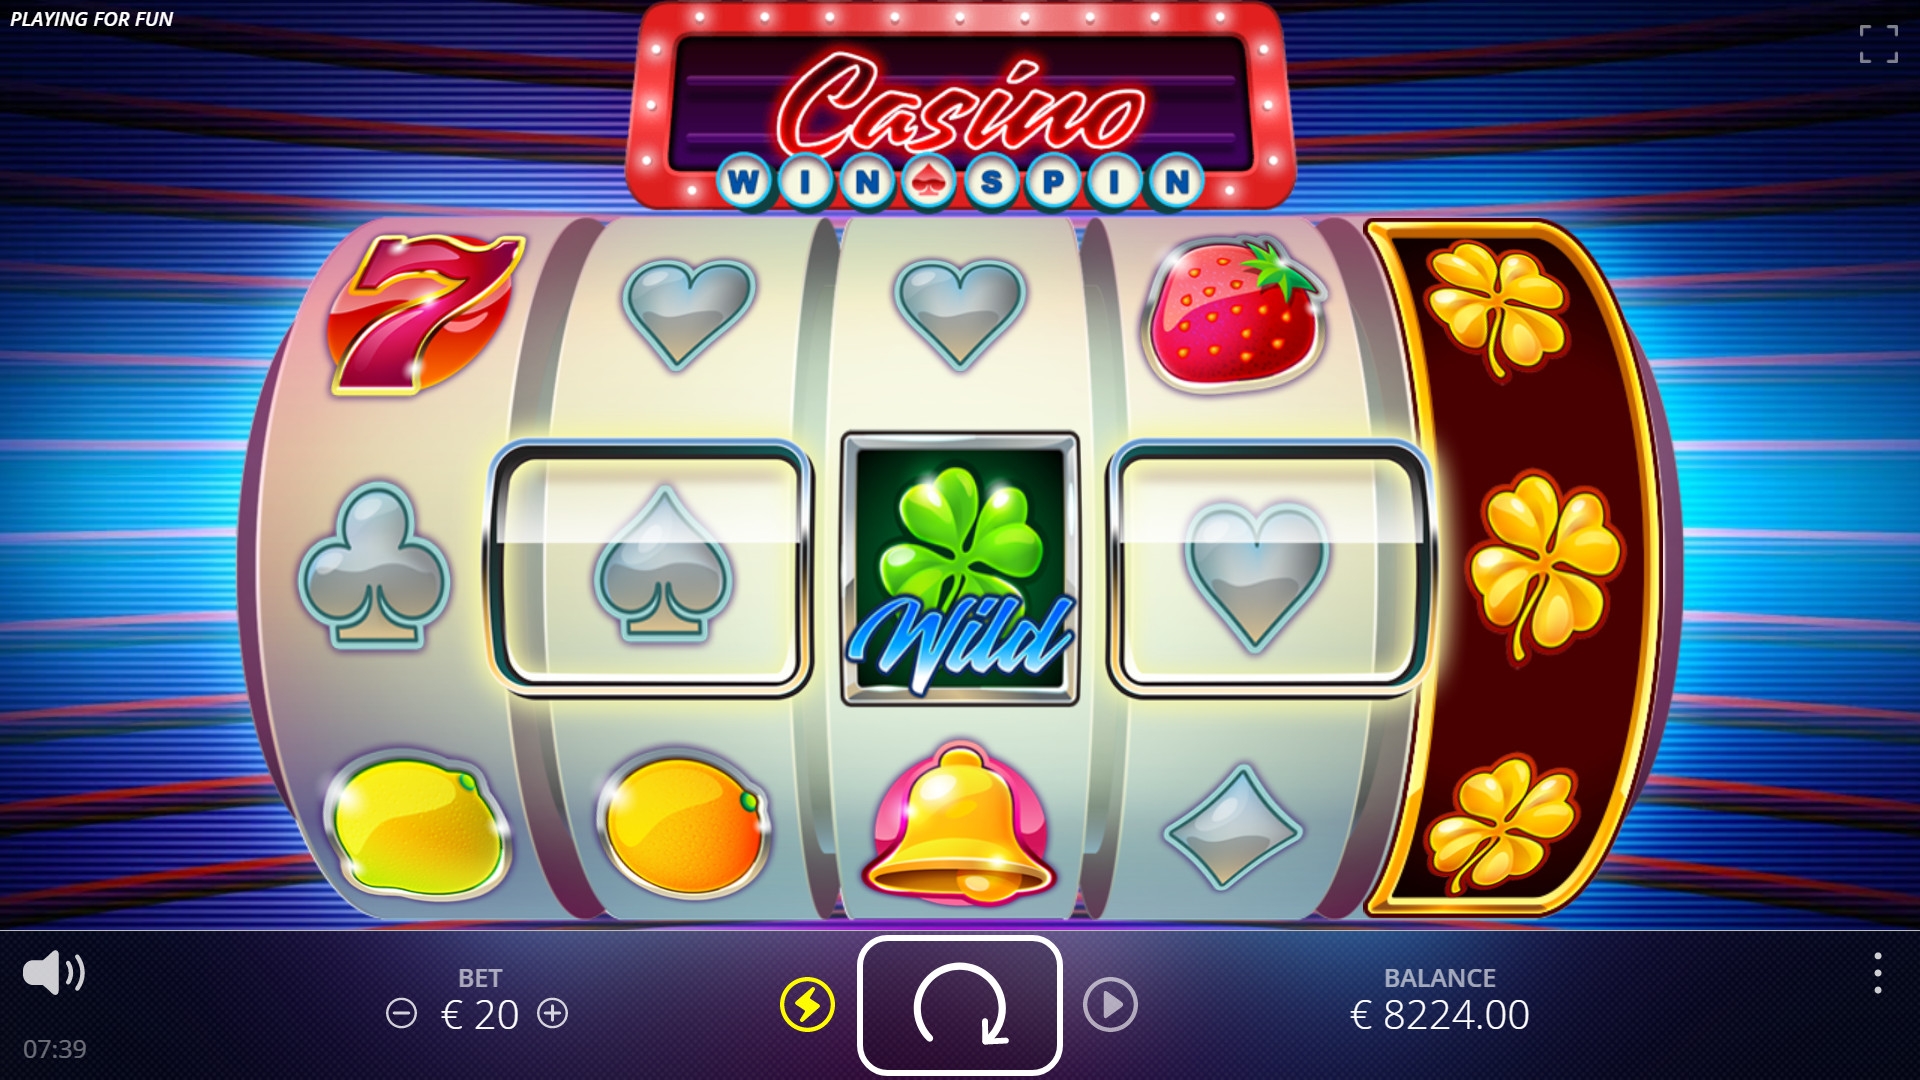 Casino Win Spin (Casino Win Spin) from category Slots